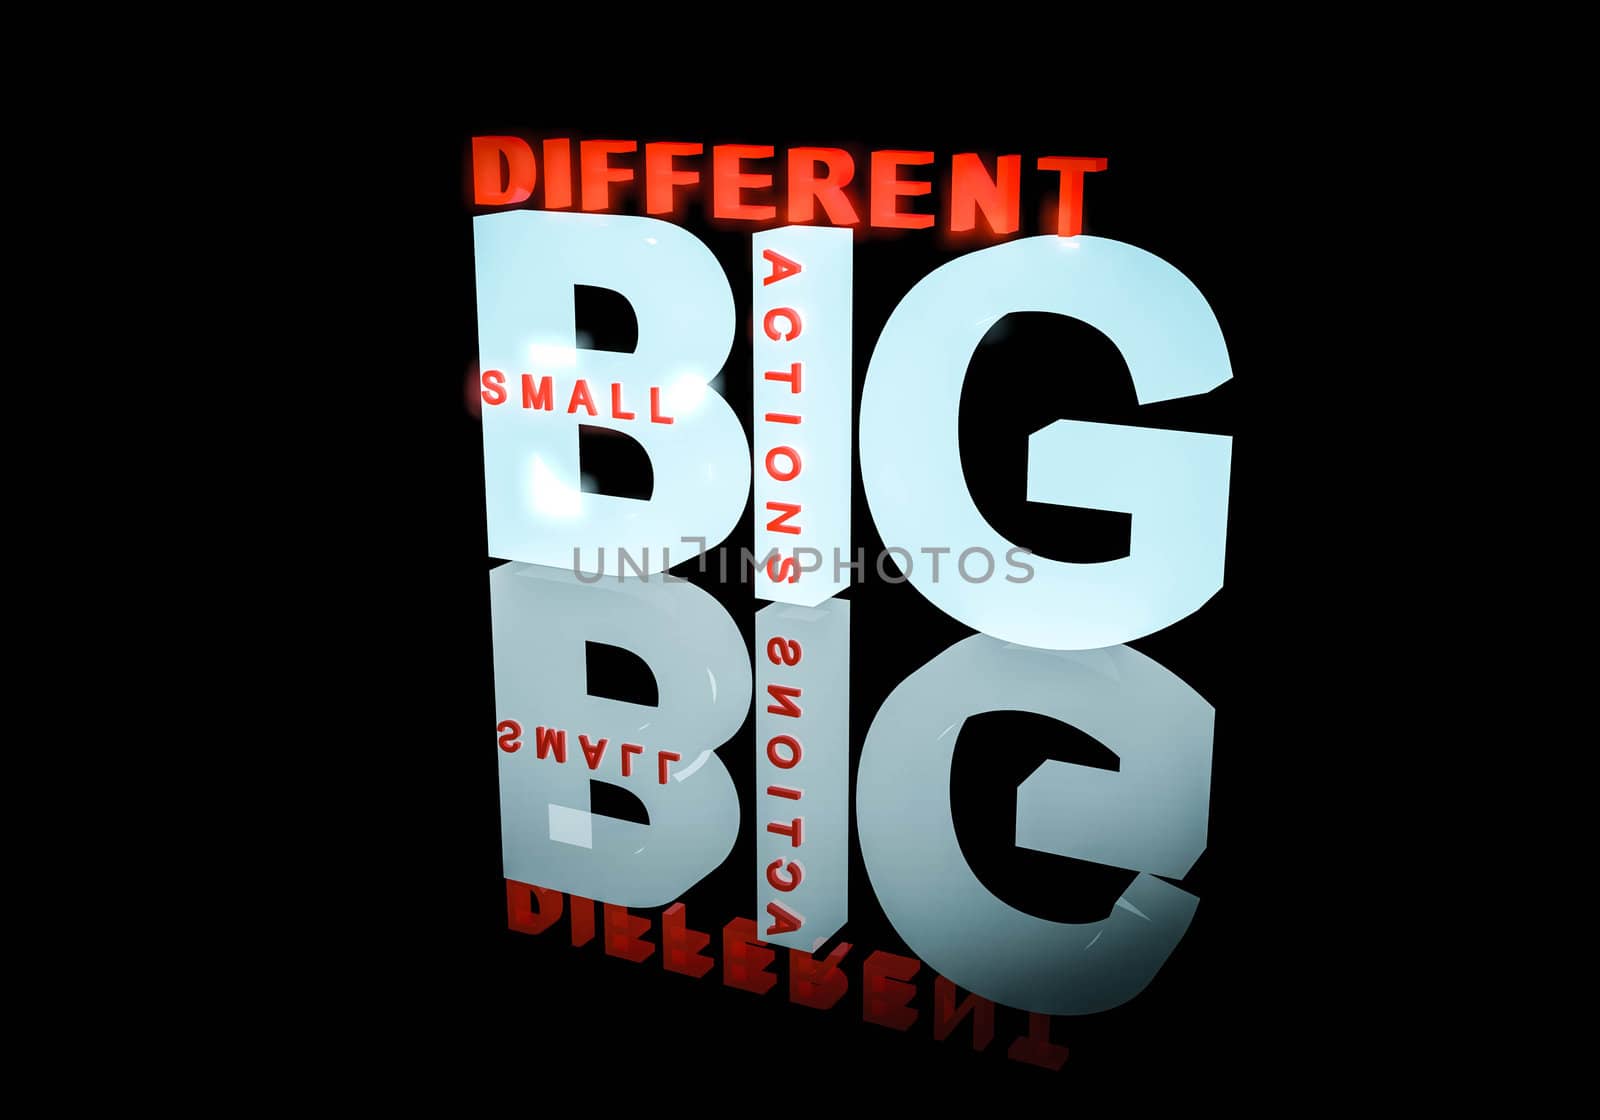 Small actions, big different conceptual text logo design using 3d on black background